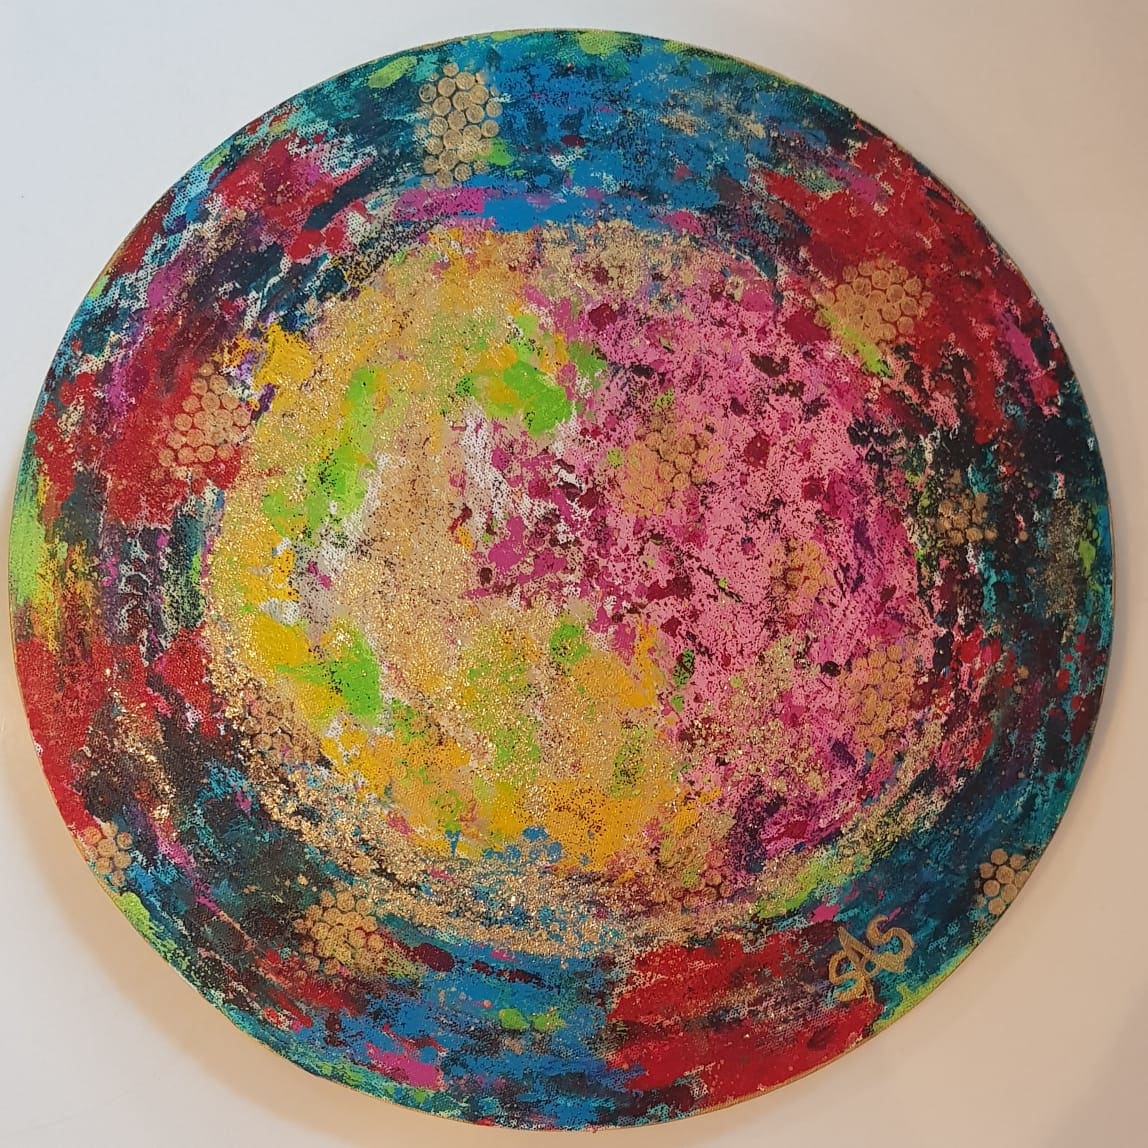 Spring  Image: The joy of spring is captured in this circular piece that brings new hope to inspire.